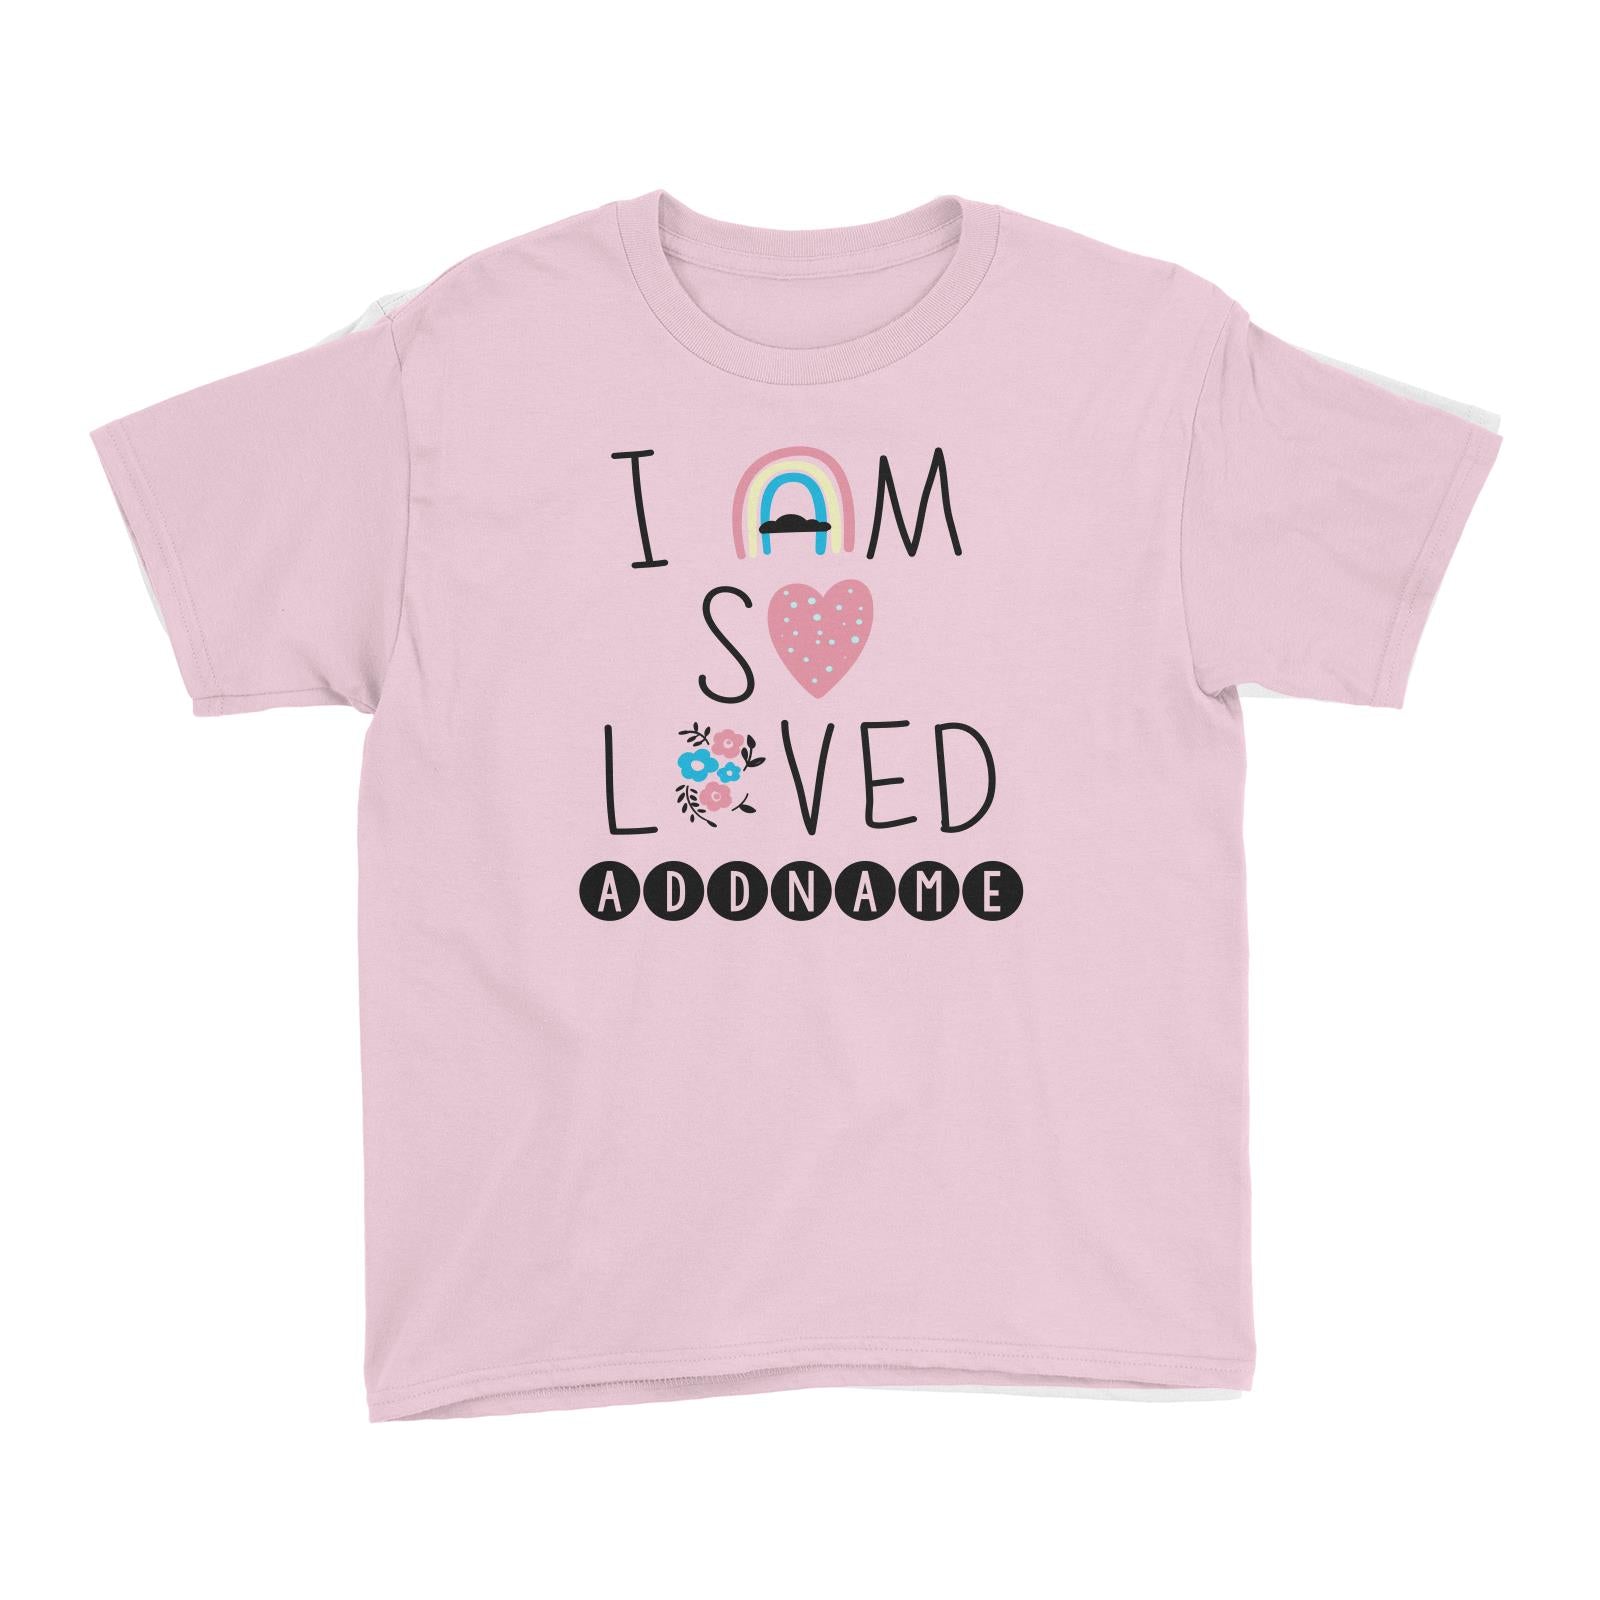 Children's Day Gift Series I Am So Loved Addname Kid's T-Shirt